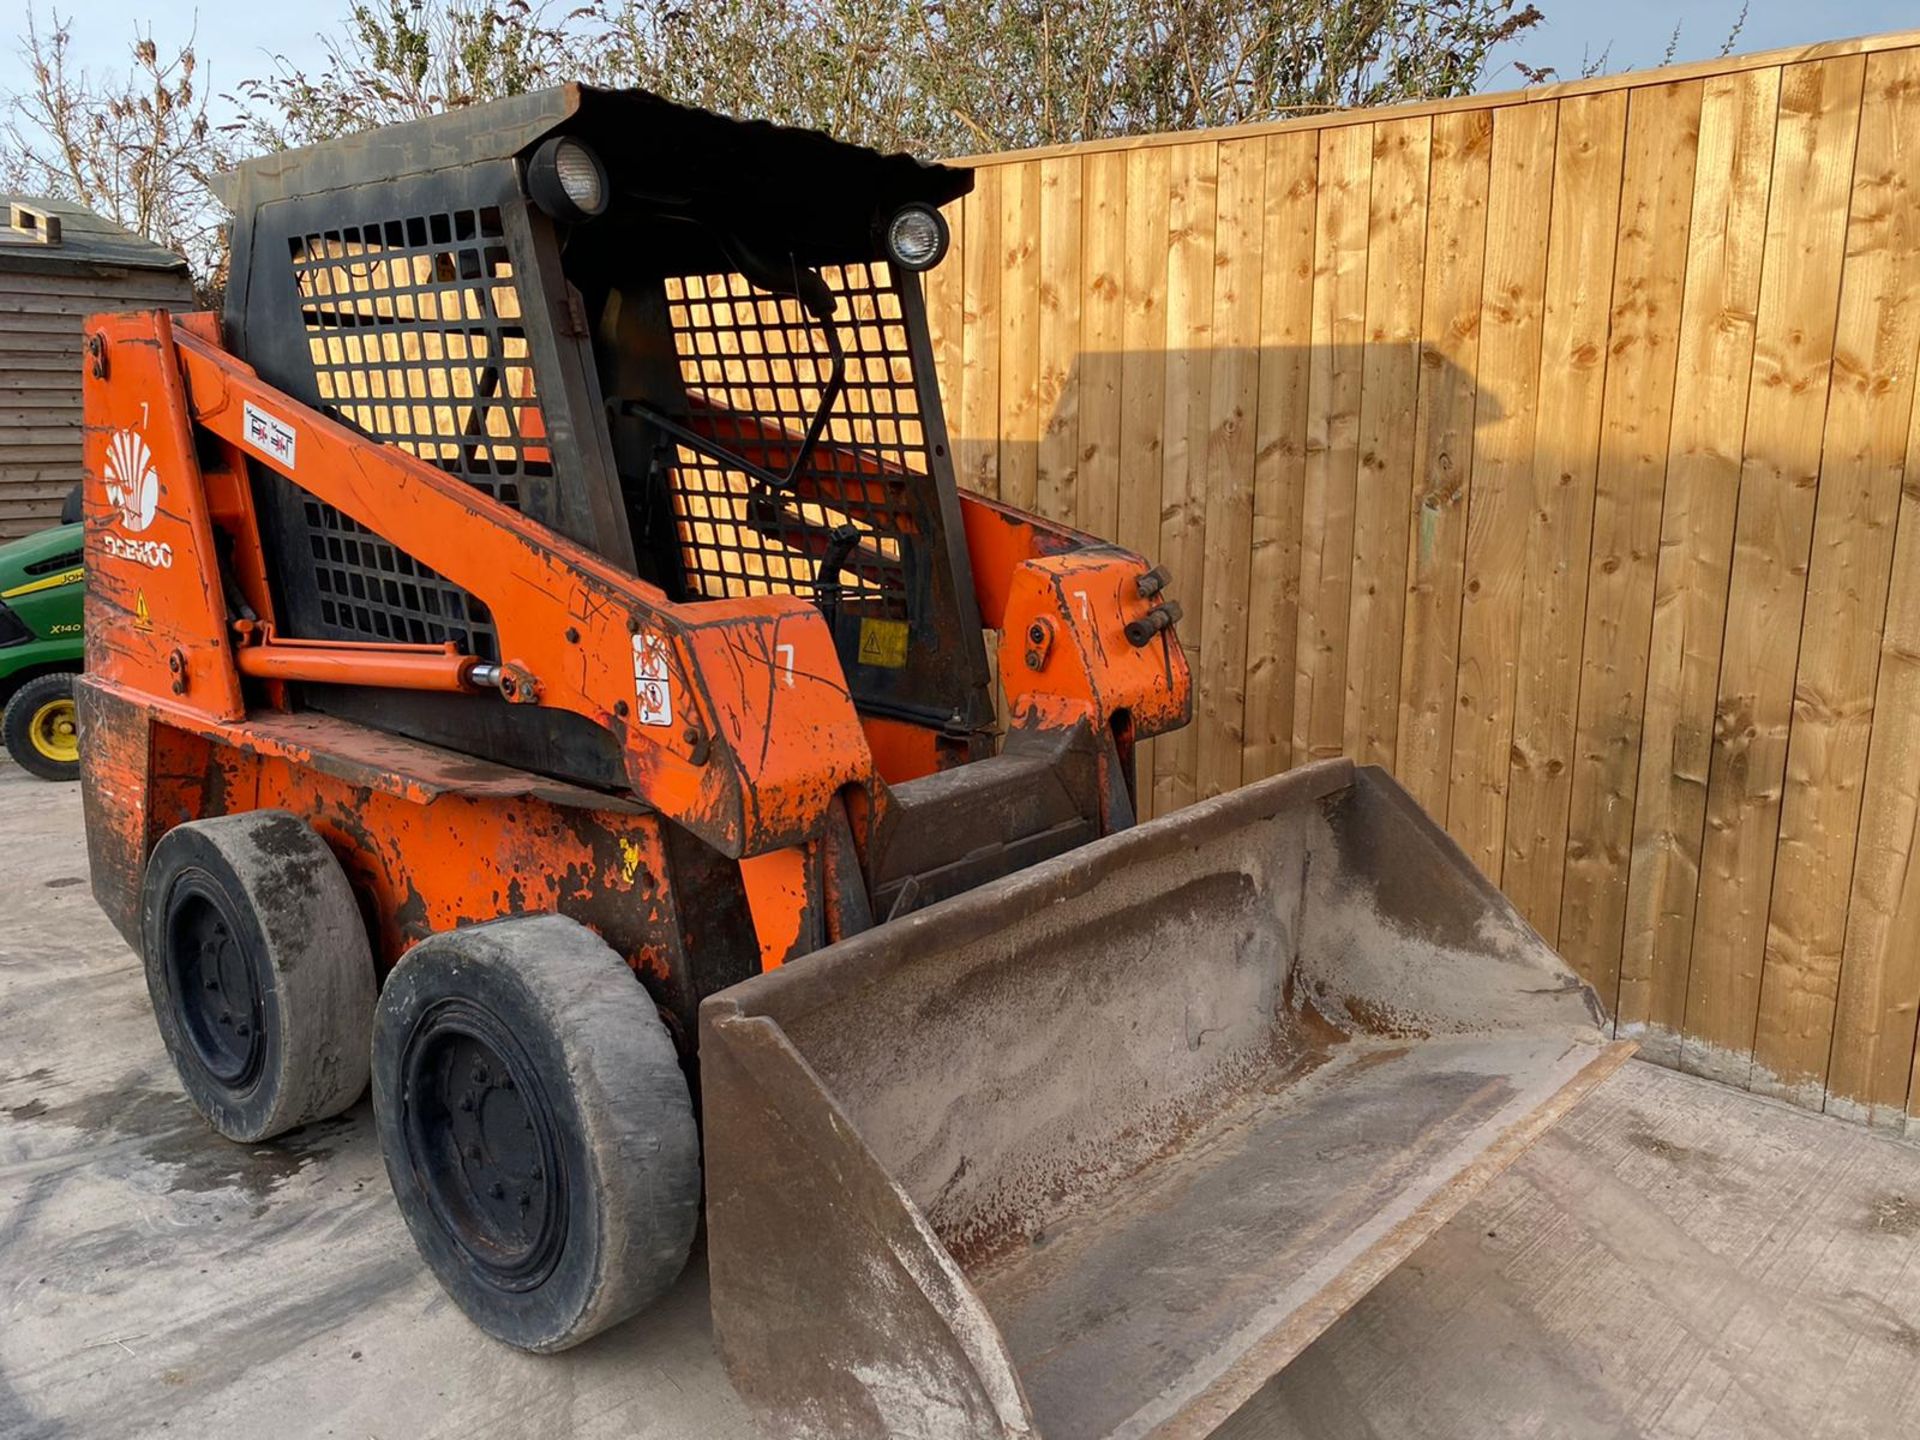 DEAWOO SKID LOADER LOCATION NORTH YORKSHIRE - Image 8 of 8